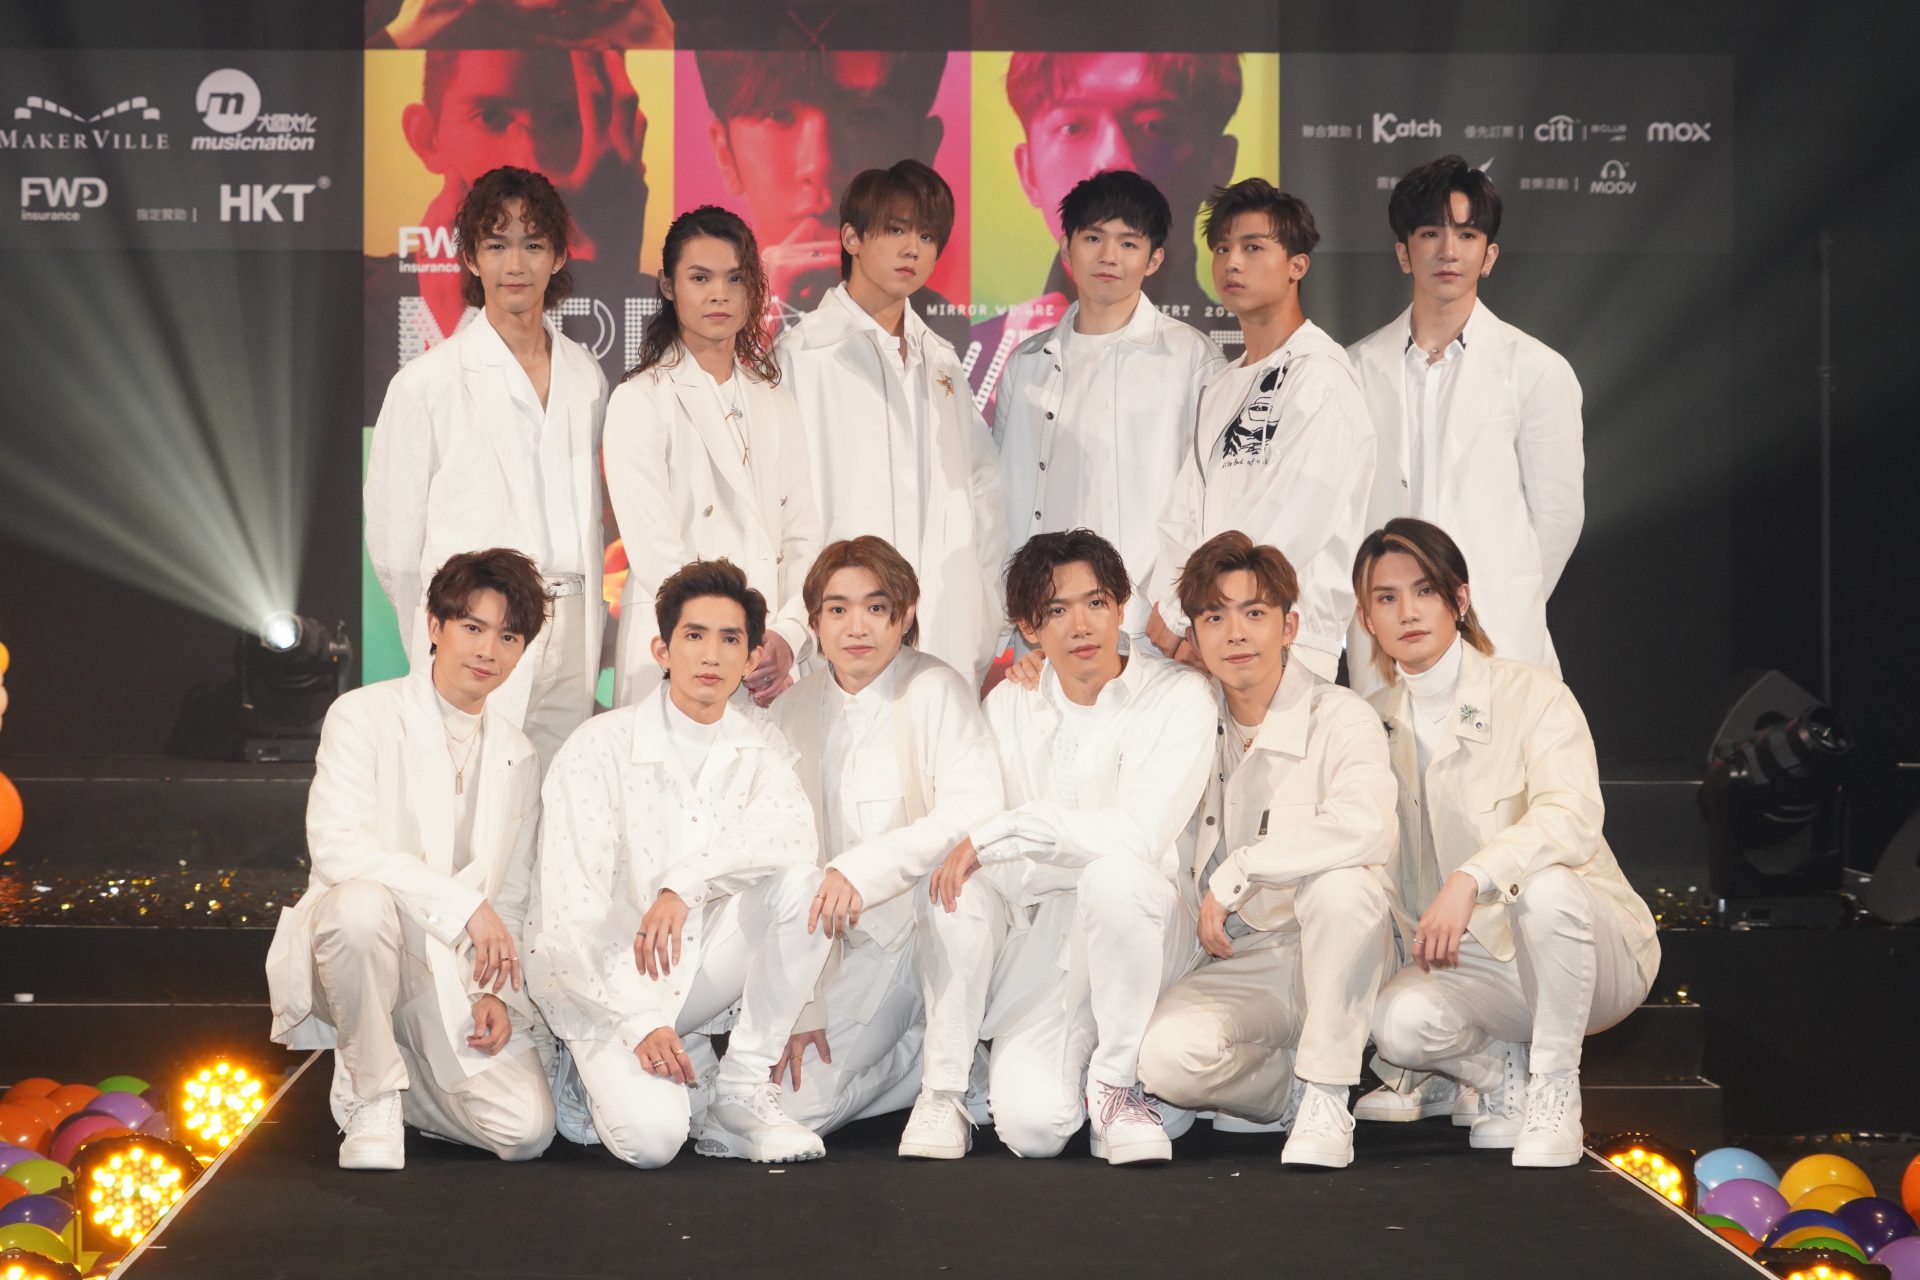 <p>‘Mirror’ is a Hong Kong-based cantopop boy band most famous for their 2020 single, ‘Ignited’. The group consists of twelve members, Frankie Chan, Alton Wong, Lokman Yeung, Stanley Yau, Anson Kong, Jer Lau, Ian Chan, Anson Lo, Jeremy Lee, Edan Lui, Keung To, and Tiger Yau.</p>